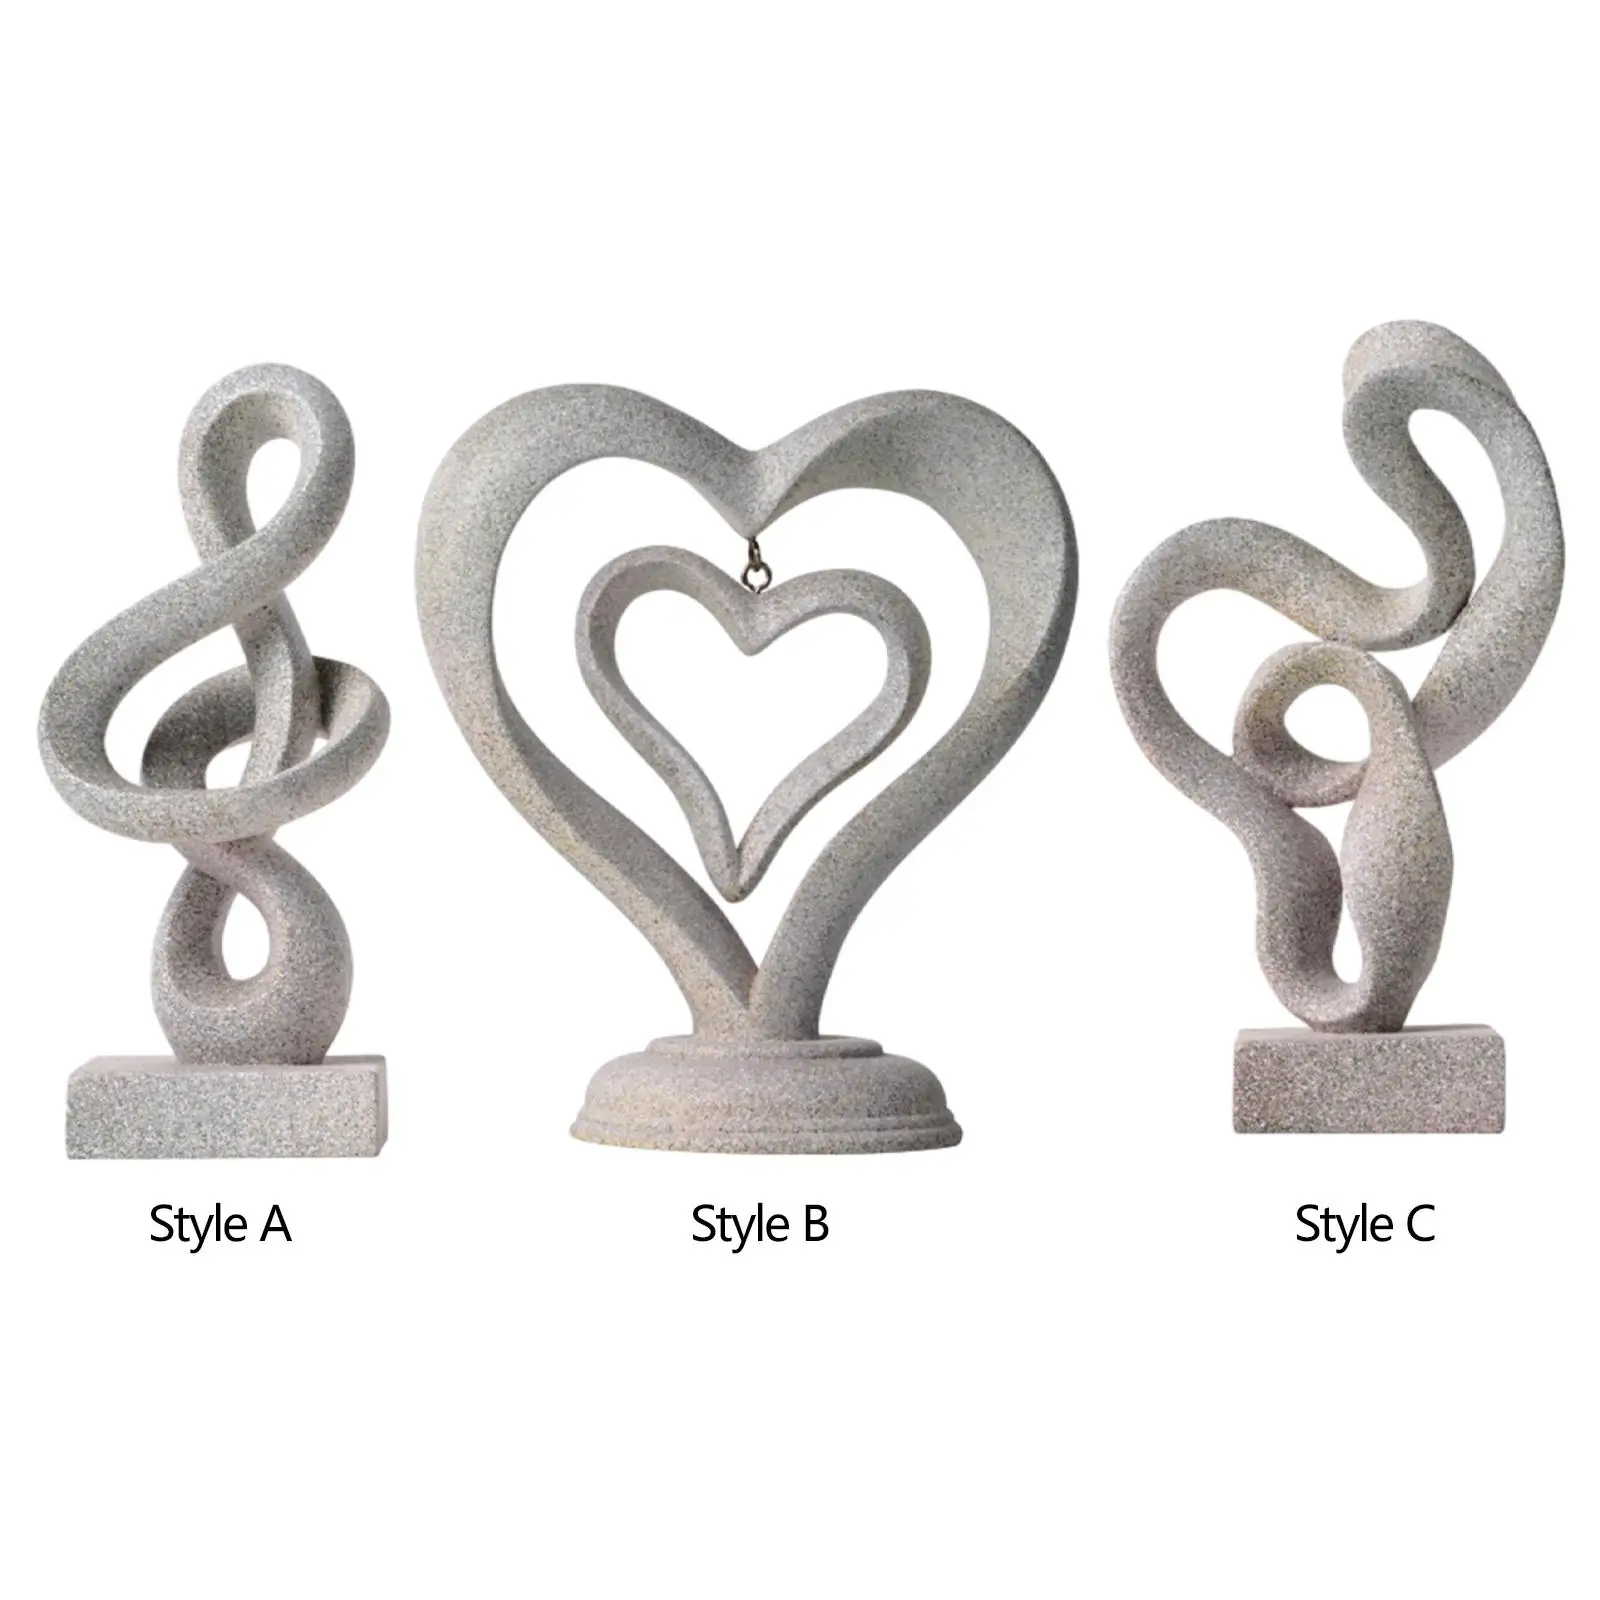 Abstract Statue Resin Abstract Figurine Collection Nordic Abstract Figure Sculpture for Shelf Desktop Hotel Office Decorations